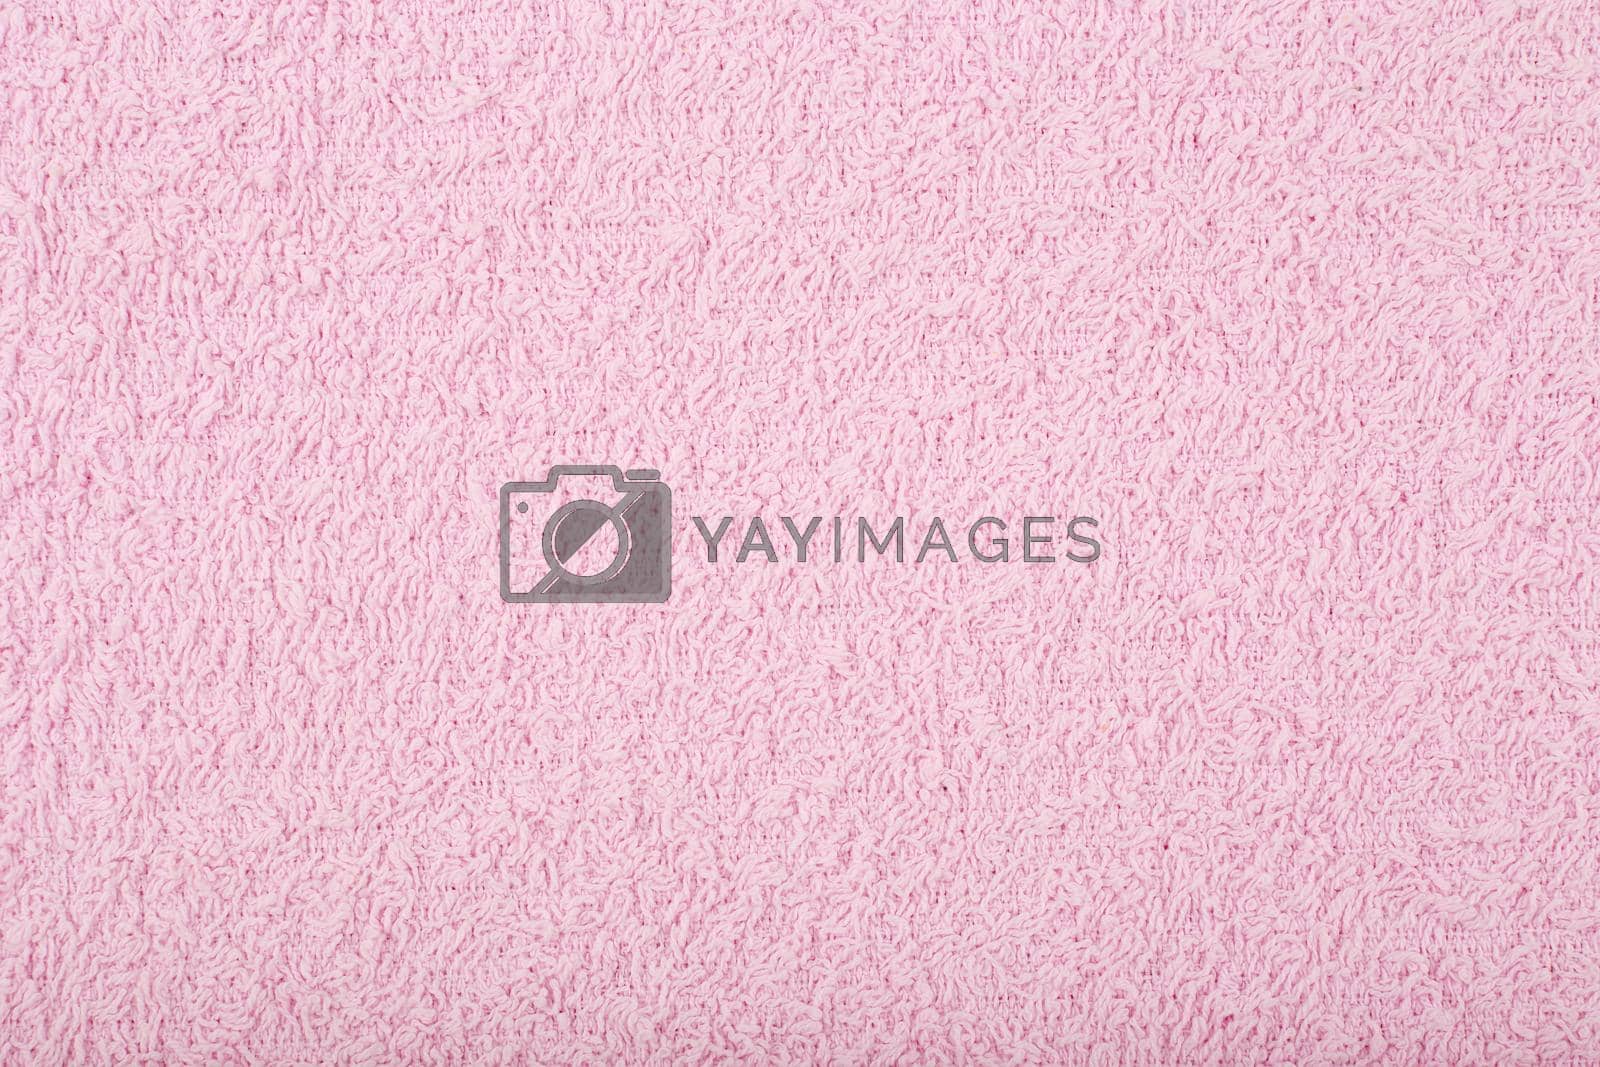 Royalty free image of Purple bathroom towel background. Fleecy fabric close up with space for text by Senorina_Irina